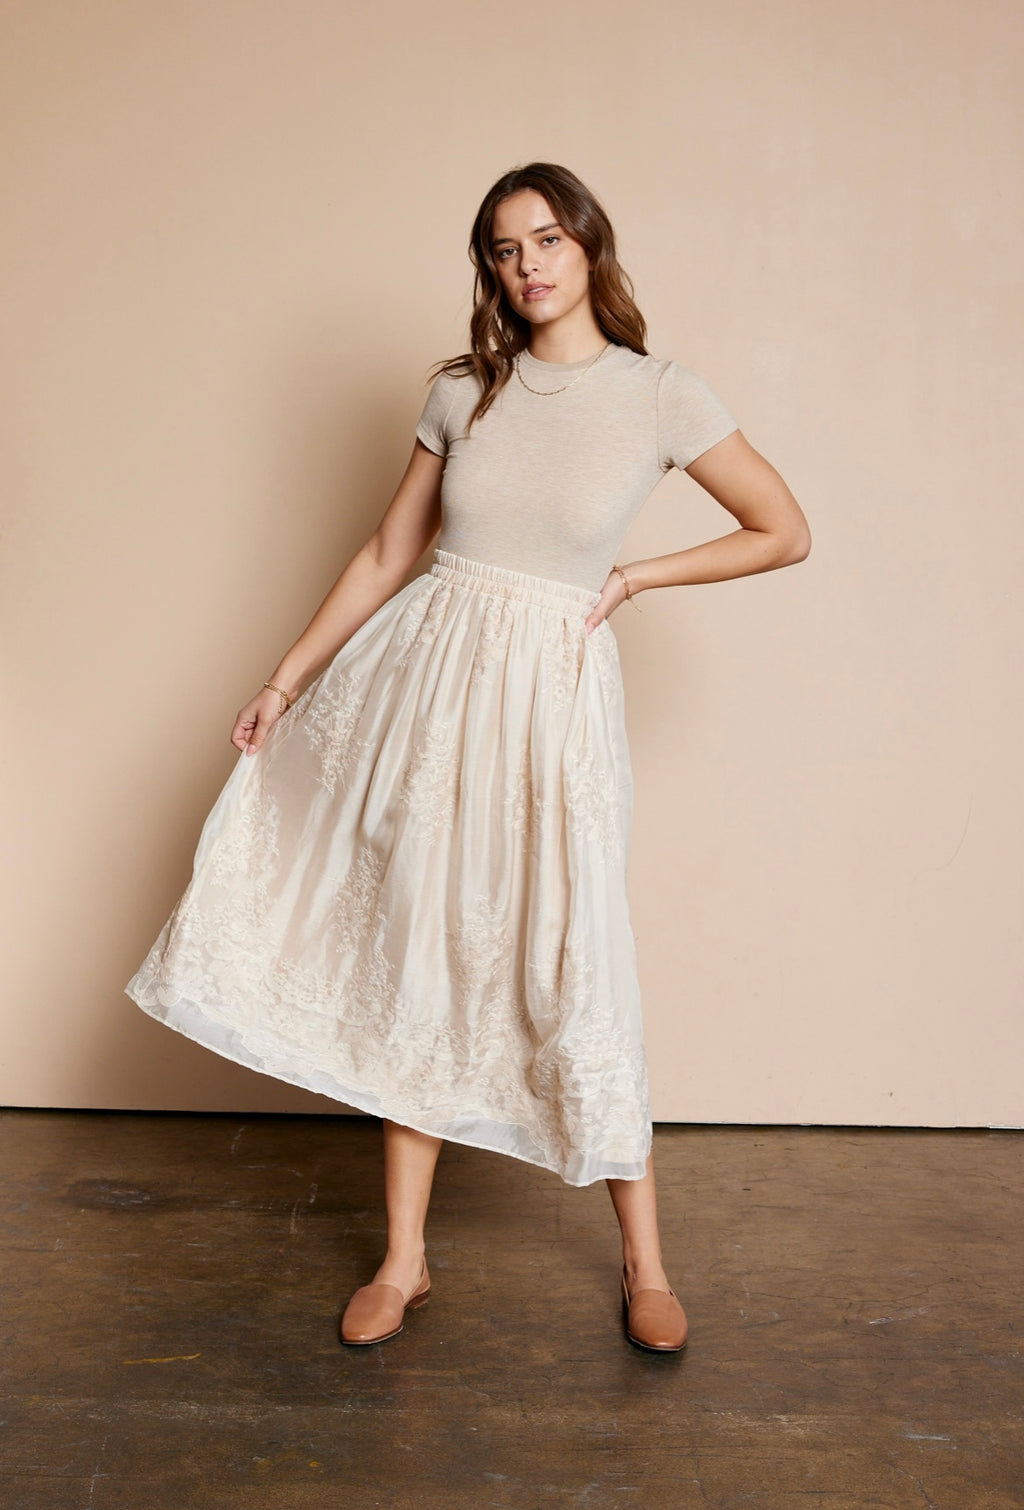 Creamy Champagne Embroidered Skirt